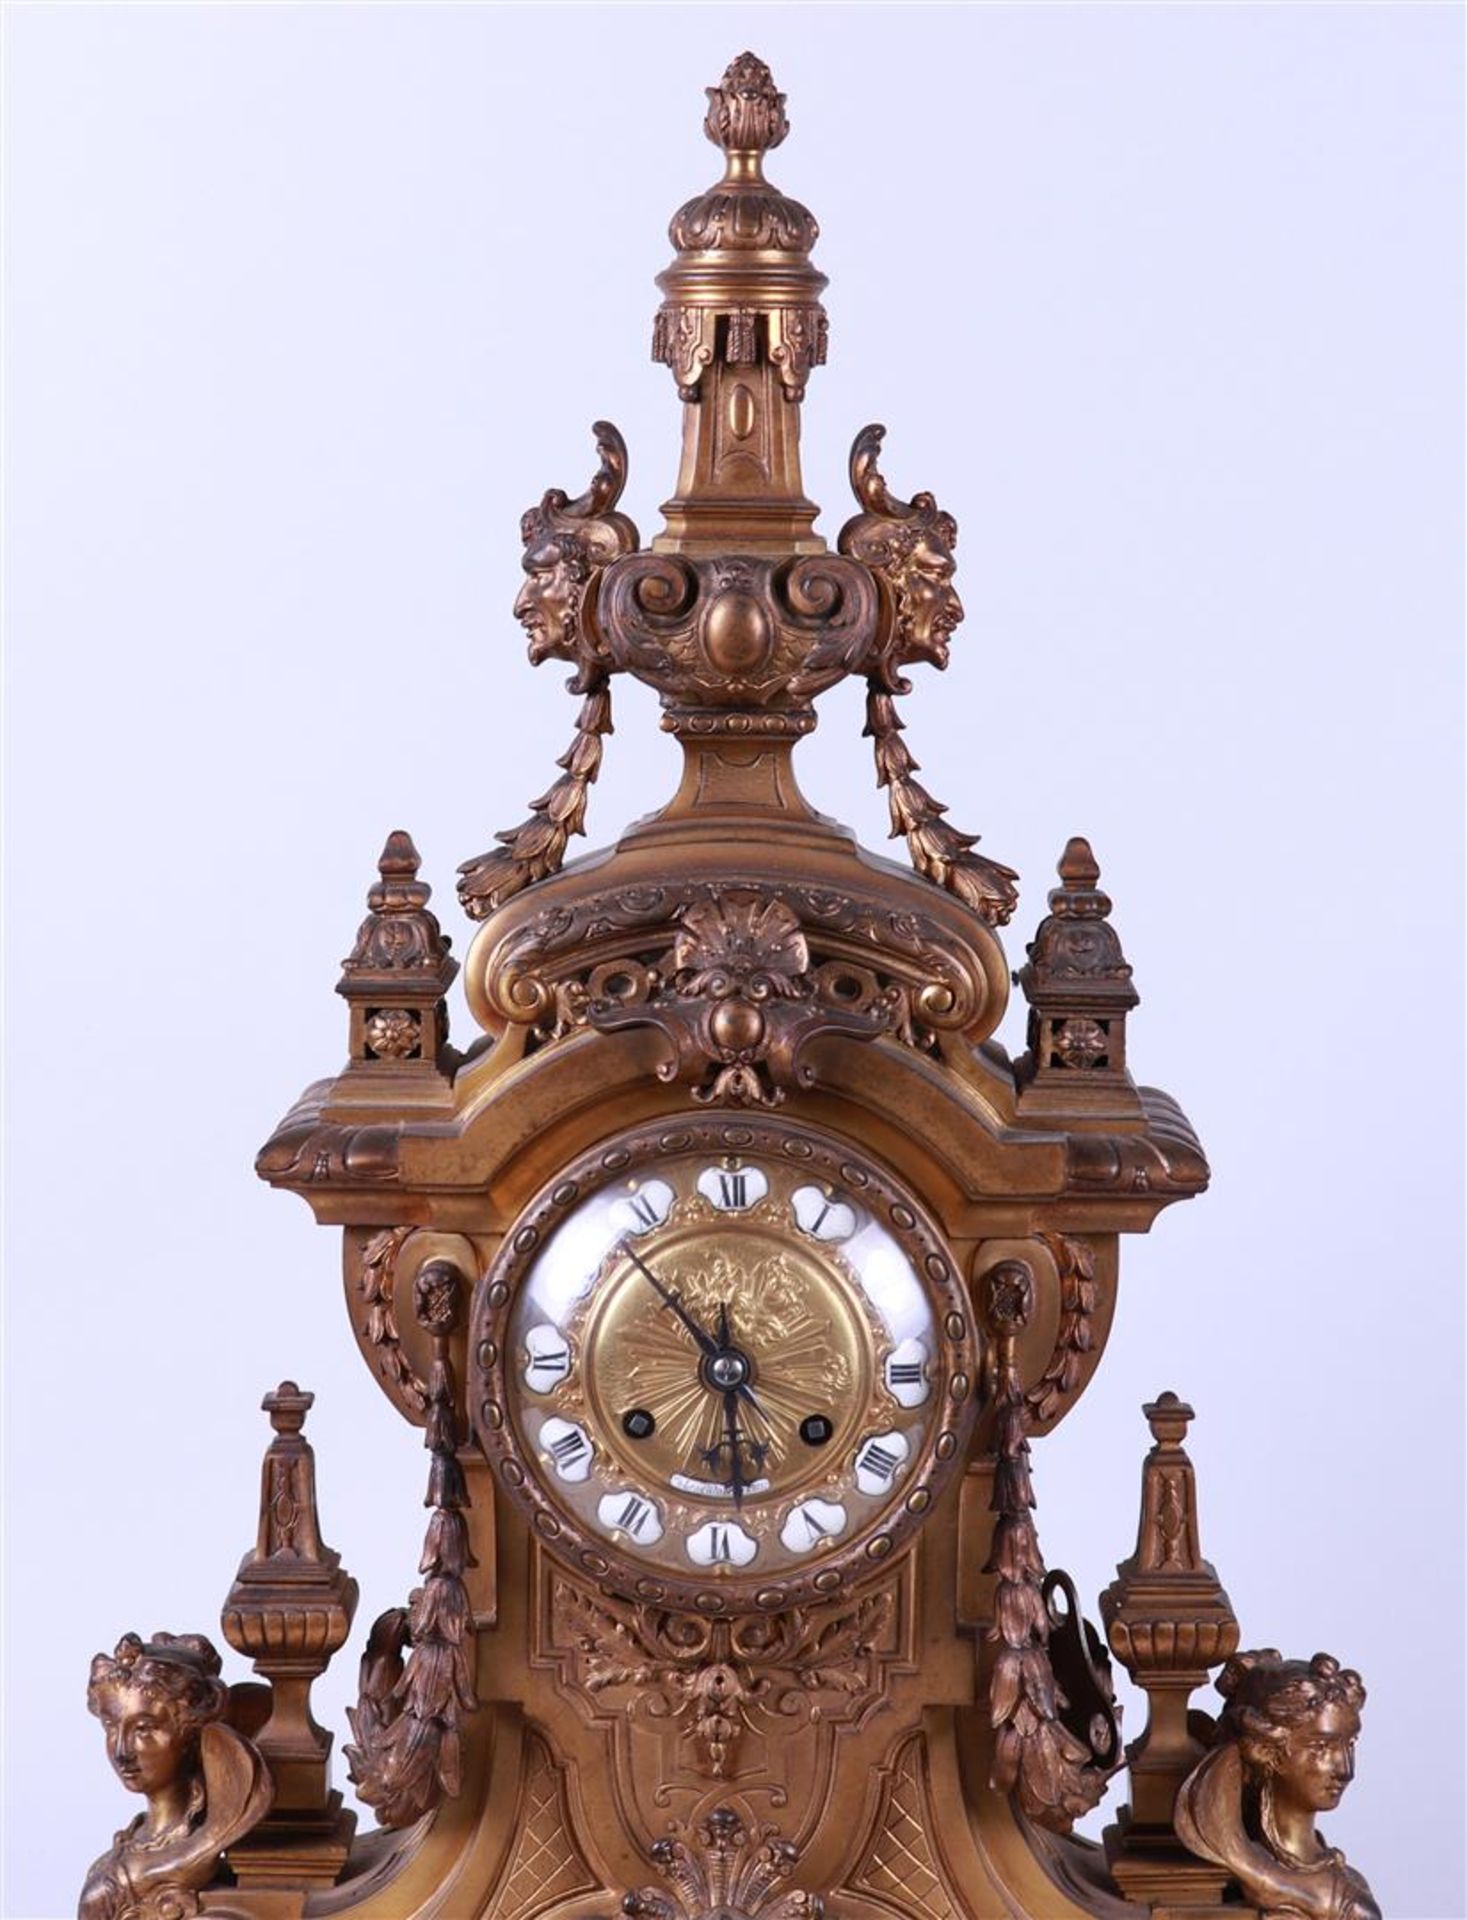 Cast Bronze Clock Set in Louis XVI Style (France, 19th Century) - Image 5 of 9